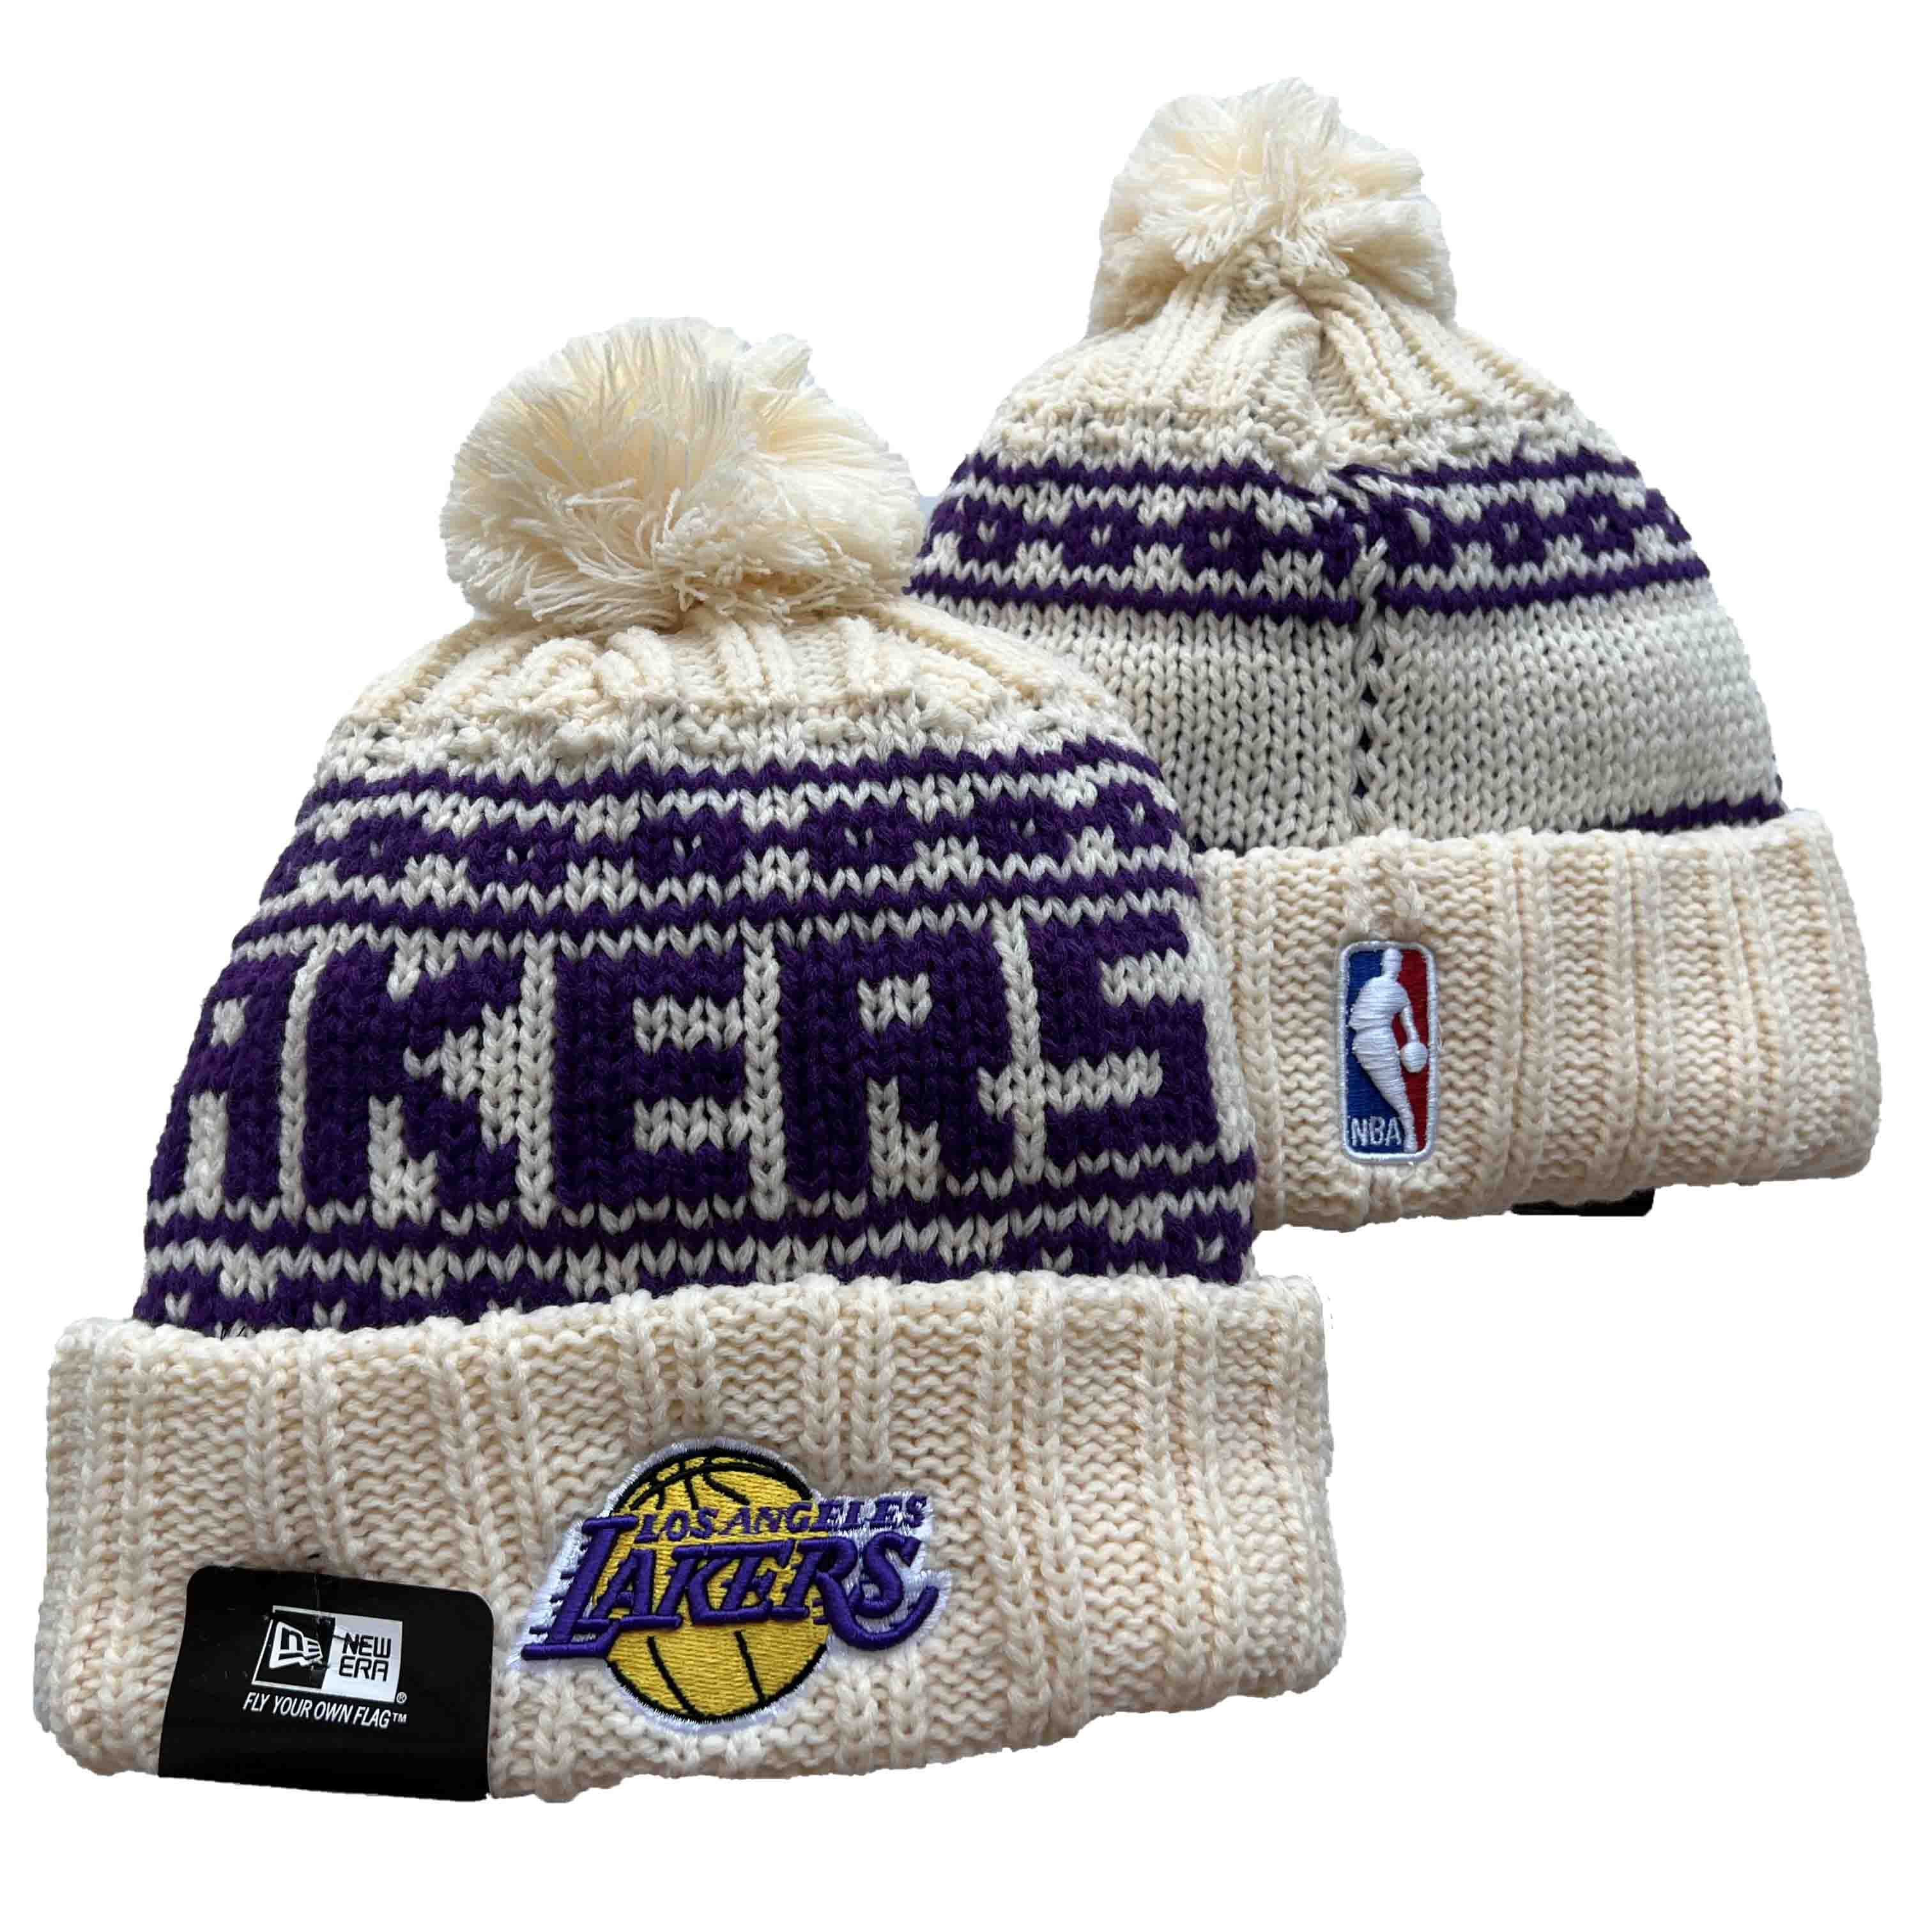 NBA Los Angeles Lakers Beanies Knit Hats-YD491